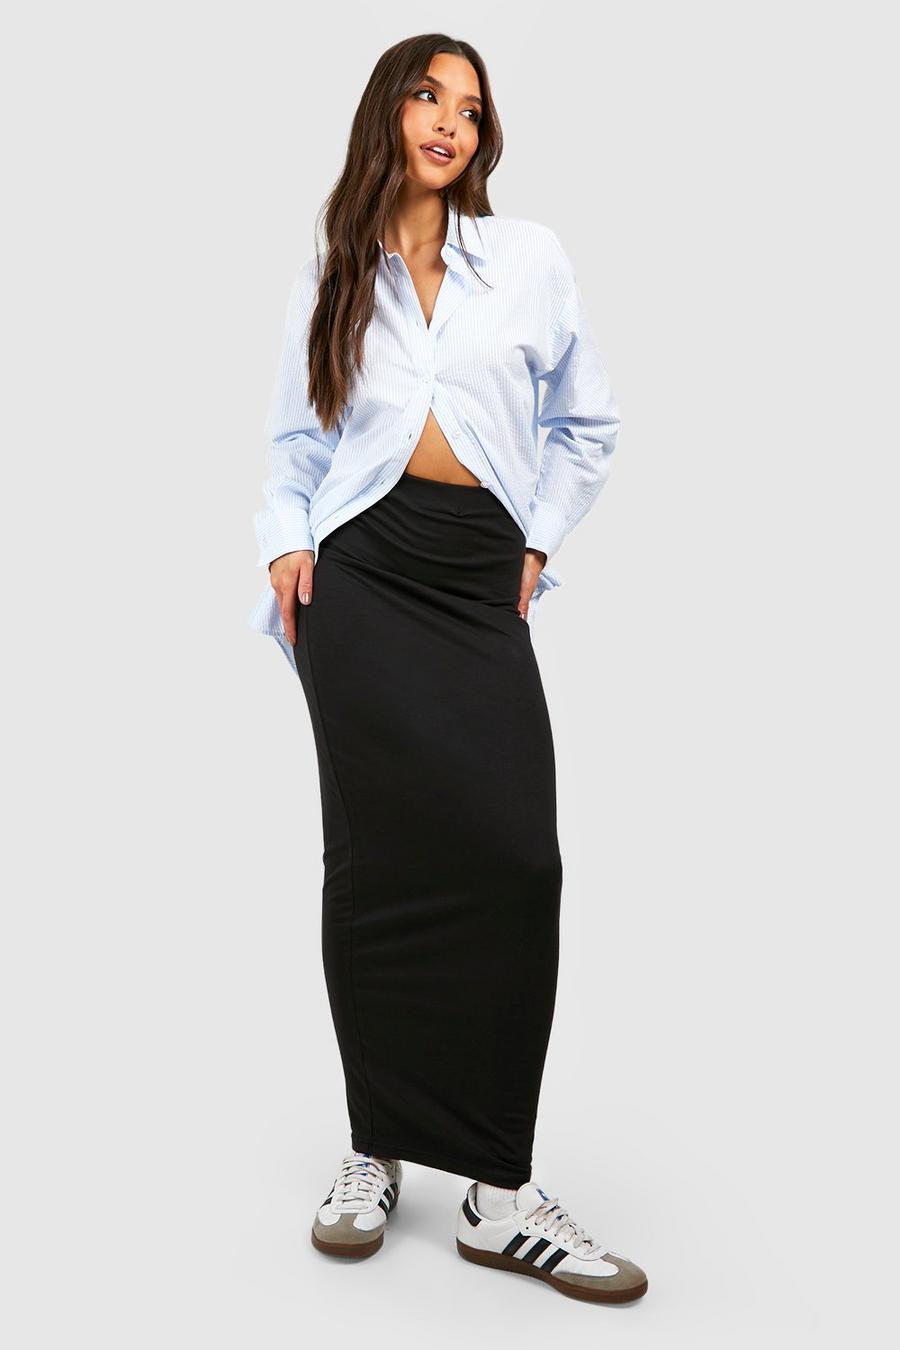 Black Cotton Jersey Knit High Waisted Slip Maxi Skirt image number 1